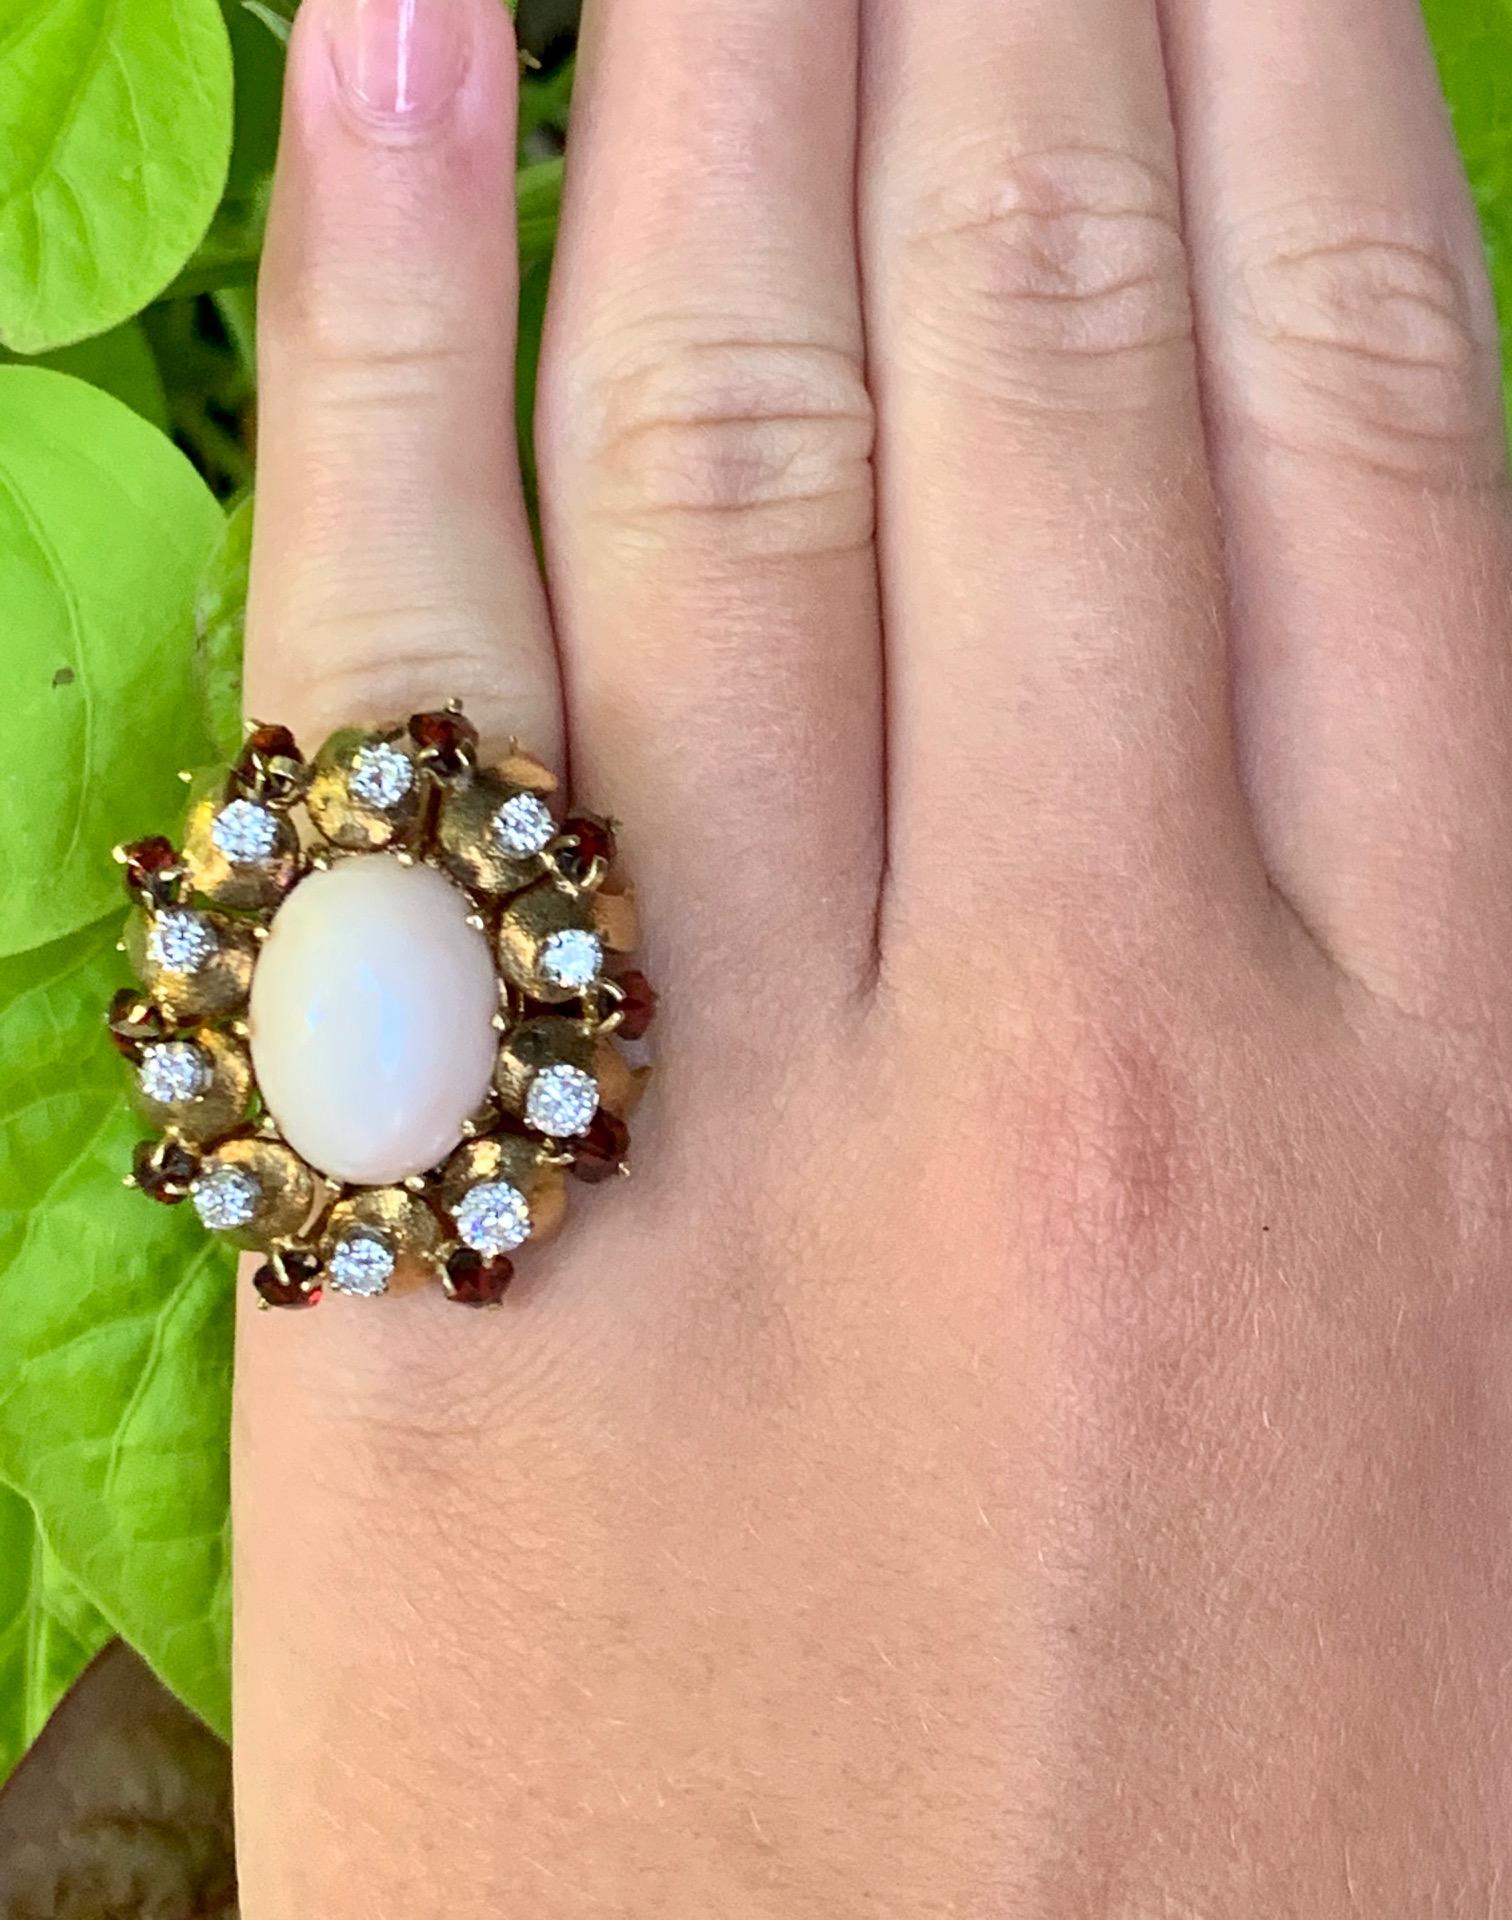 This ring features a beautiful Angel Skin Coral cabochon as the center stone.  The Coral measures 17 x 11mm.  It is surrounded by  10 pear cut 5x3mm Brown Garnets and 10 brilliant cut Diamonds. The Diamonds total approximately 1.30ctw with an